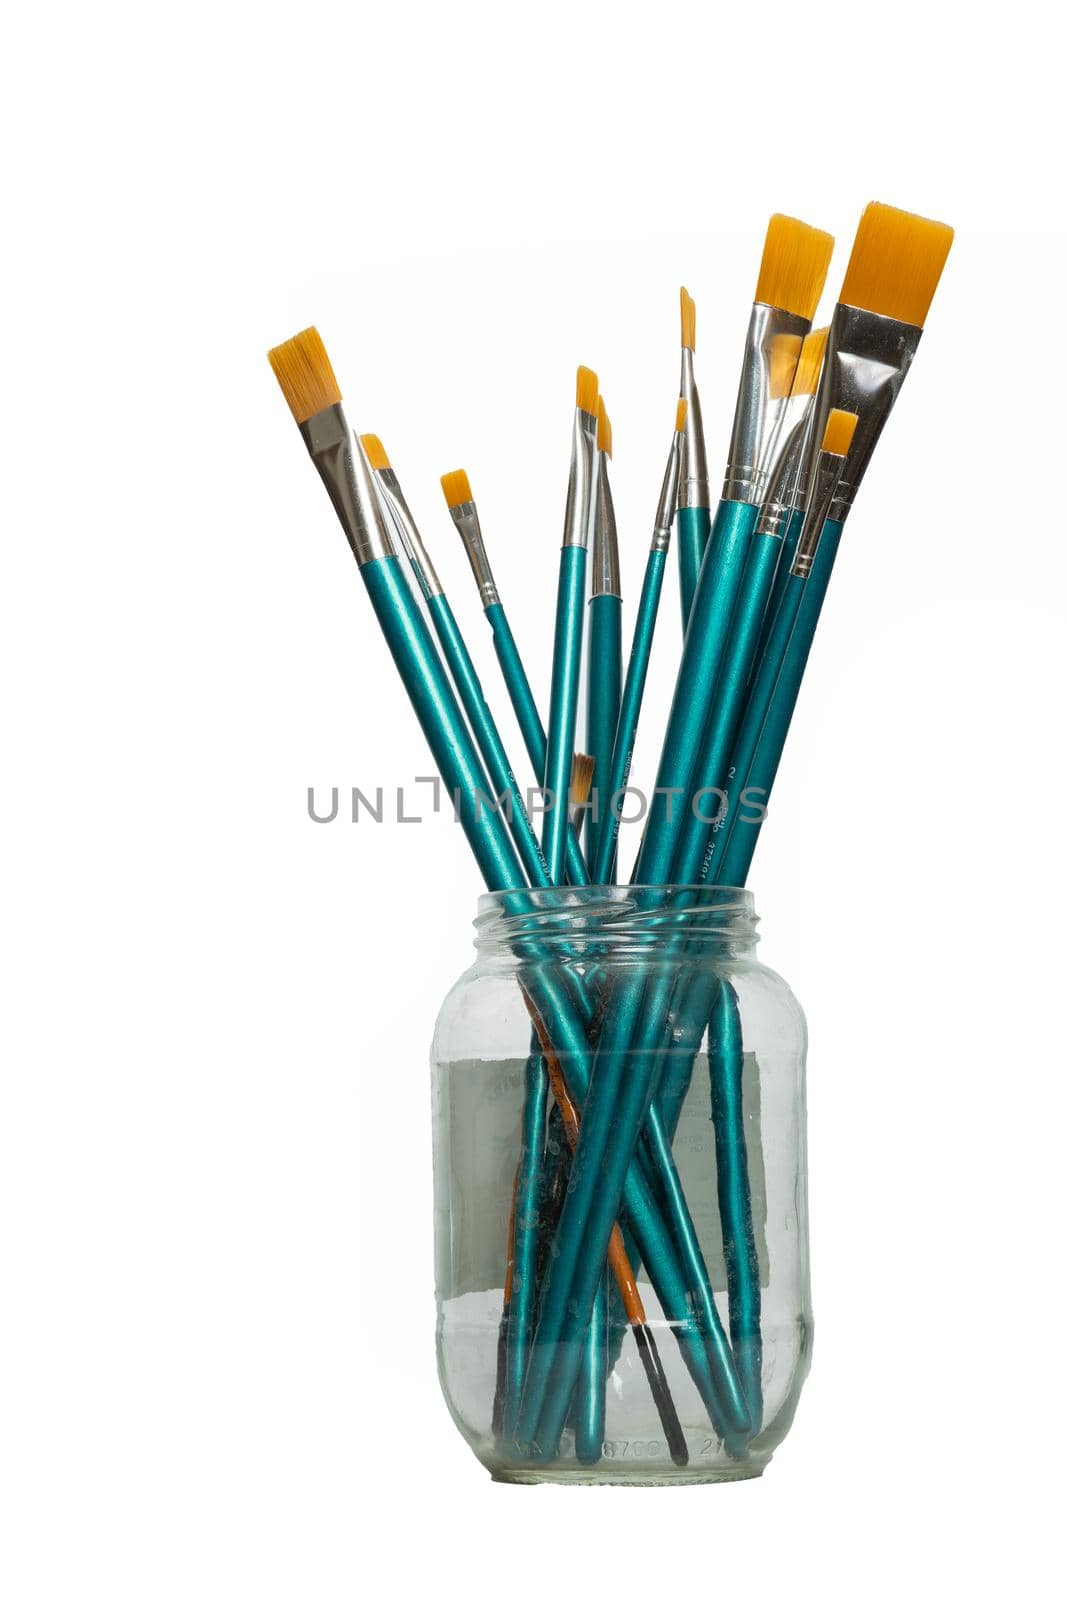 blue brushes in a glass jar white background by joseantona